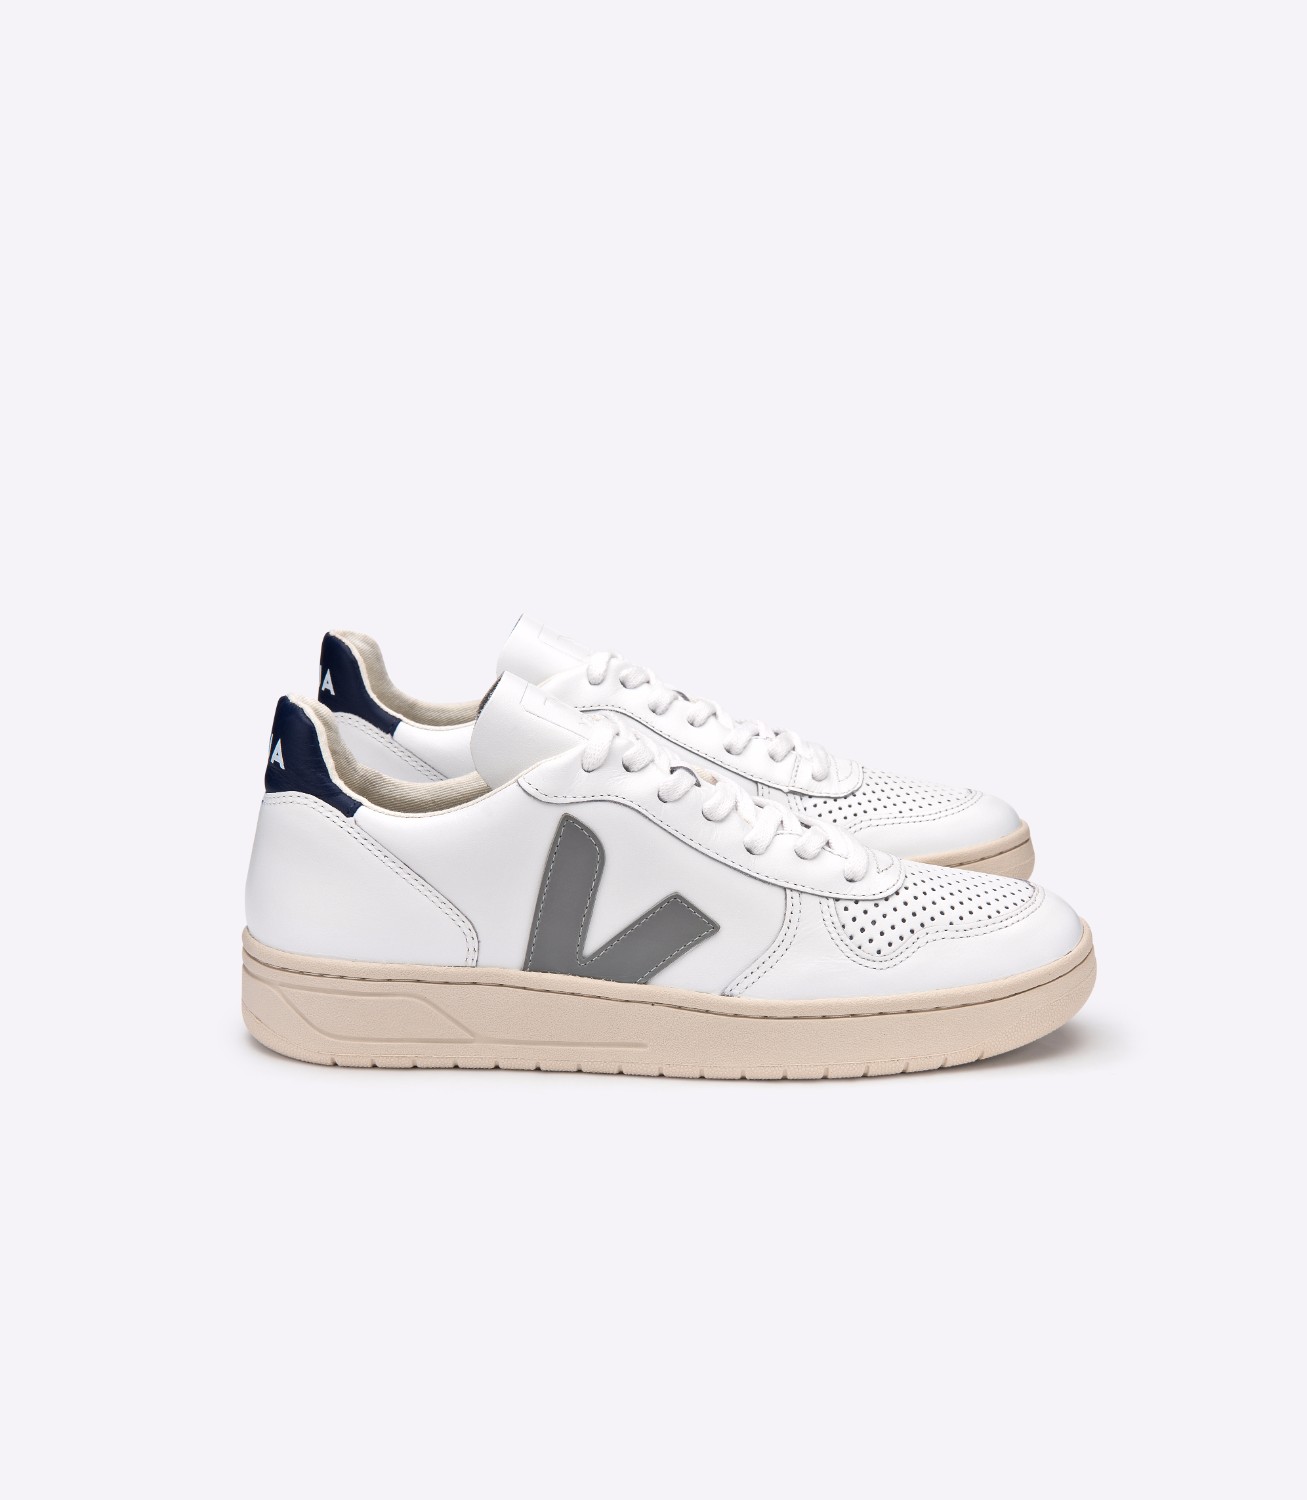 Veja Debuts A New Sneaker Silhouette & Adds Disco Flavor To An Old Fave